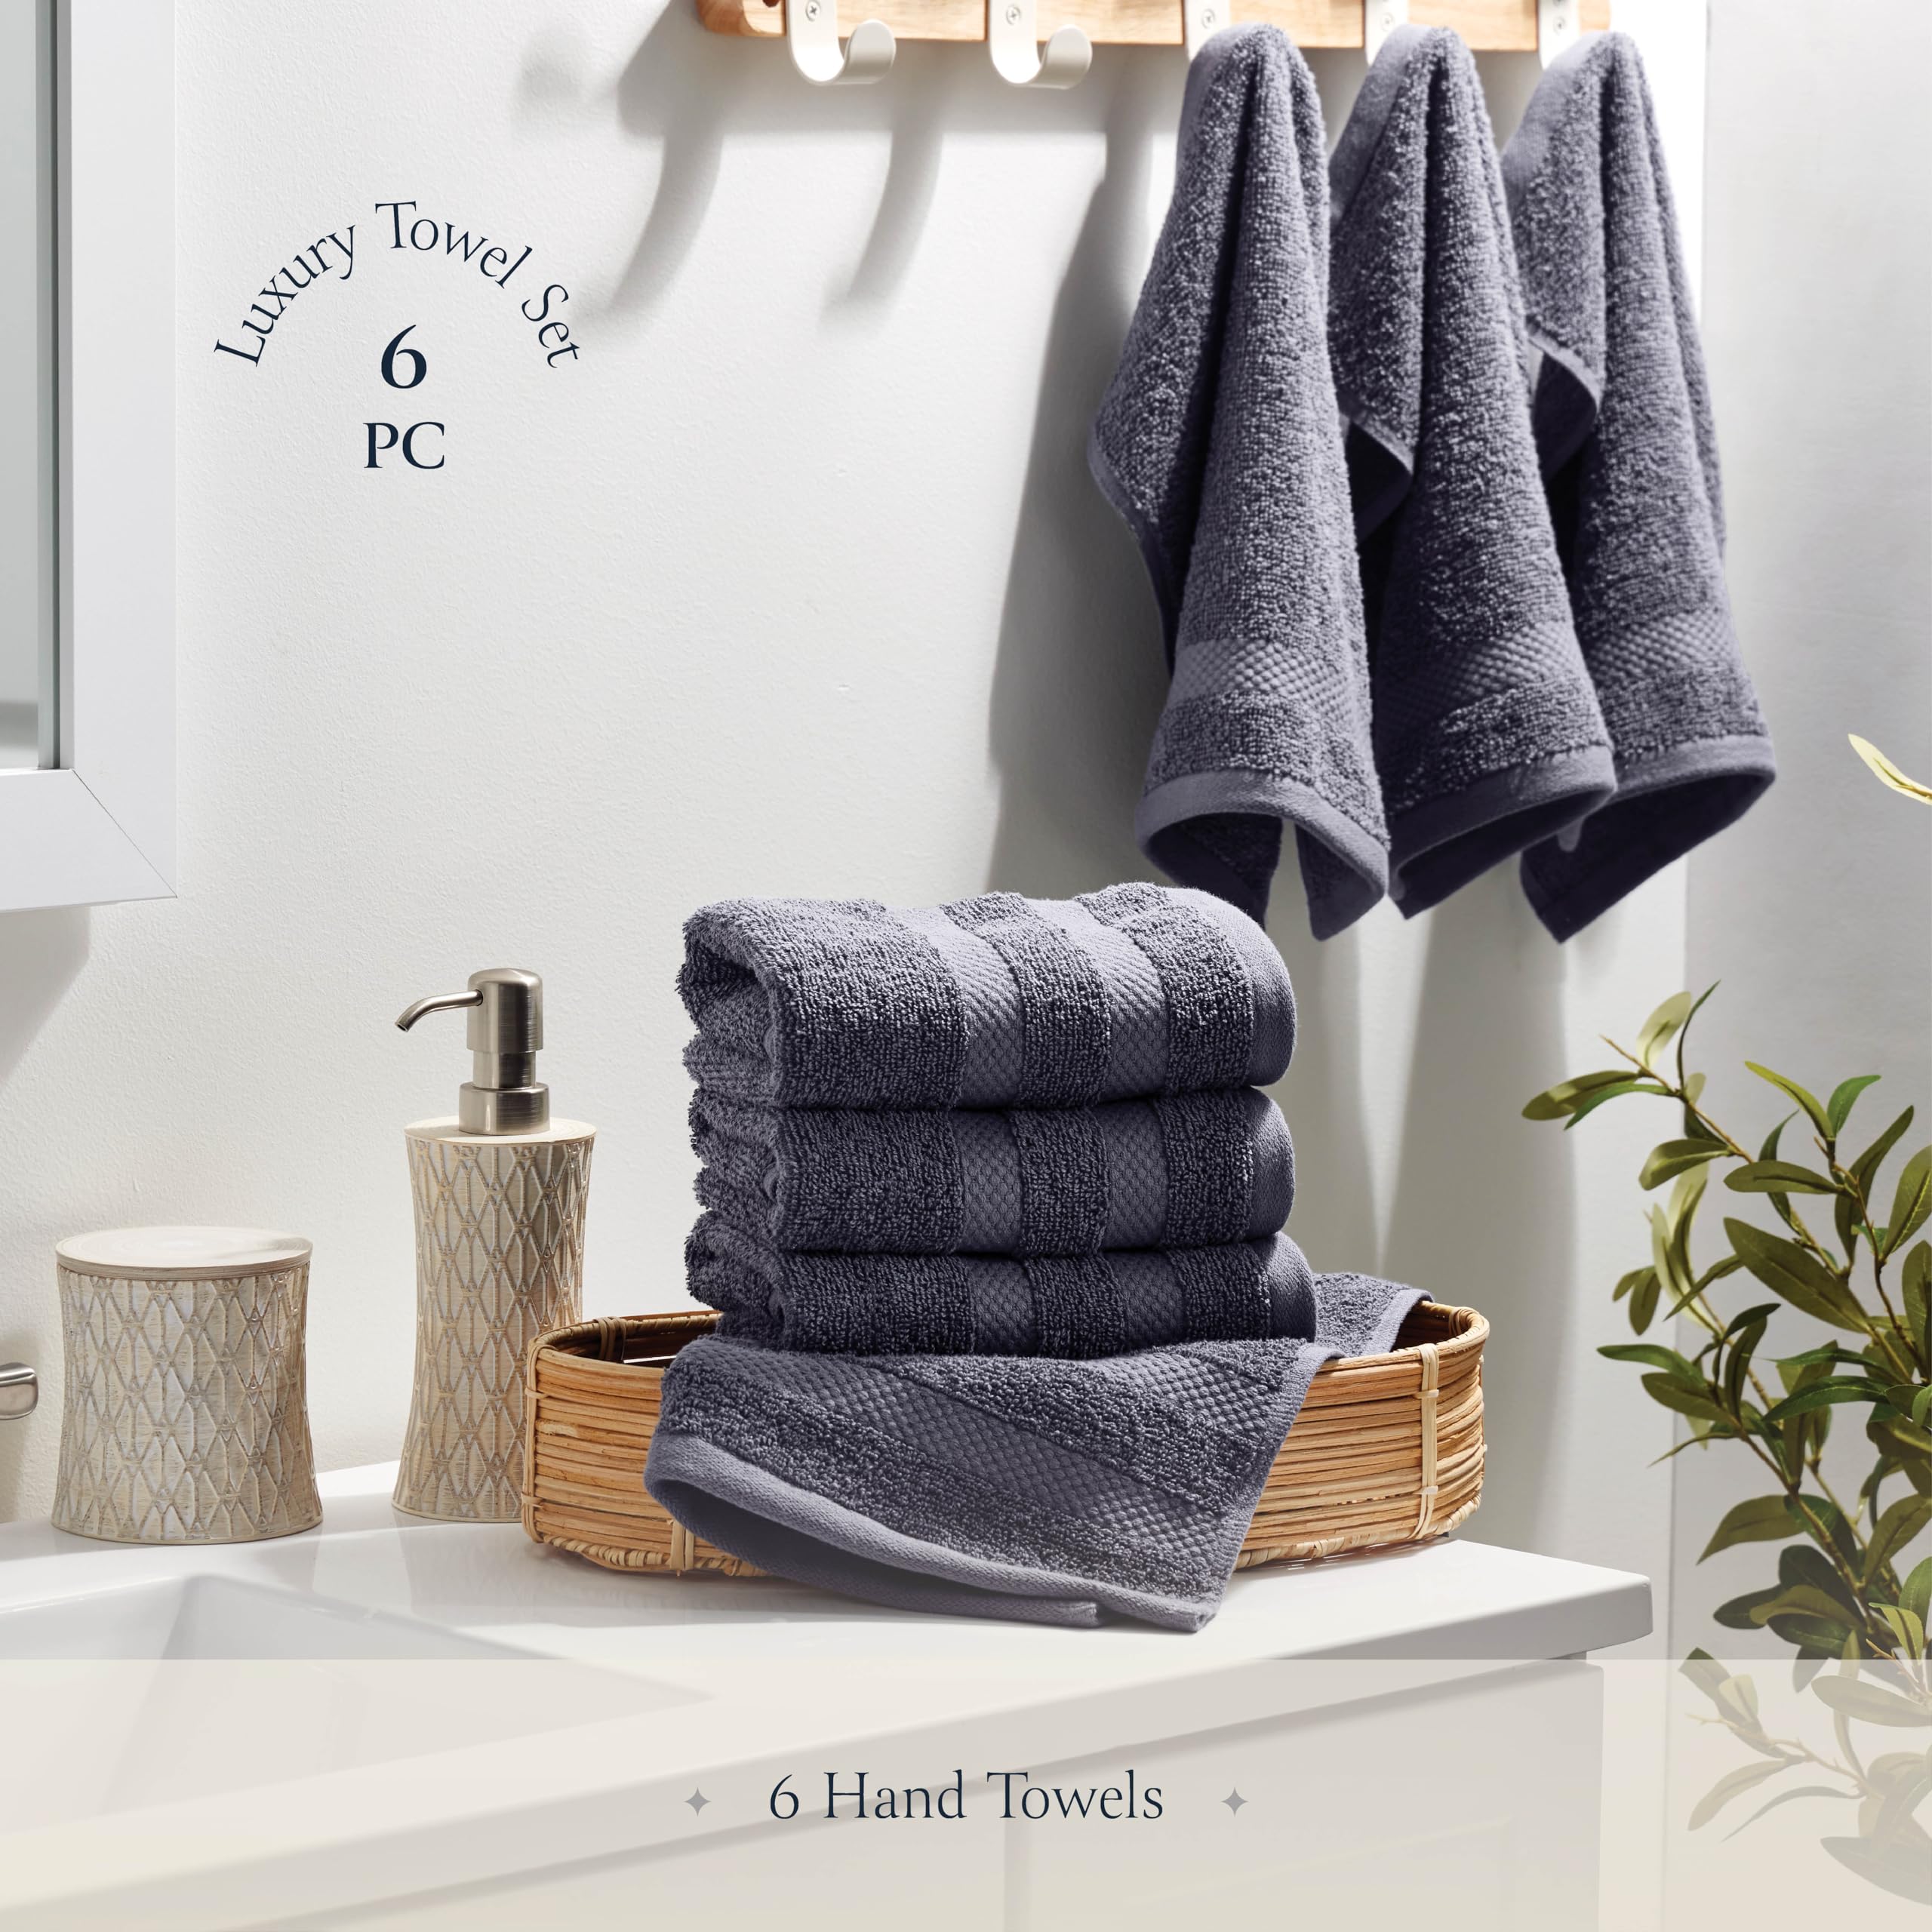 BELADOR Hand Towels 12-Pack - Premium Soft Cotton Hand Towels for Bathroom - Quick-Dry & Absorbent Hand Towel Set | White/Gray Hand Towels 16"x30"  - Like New